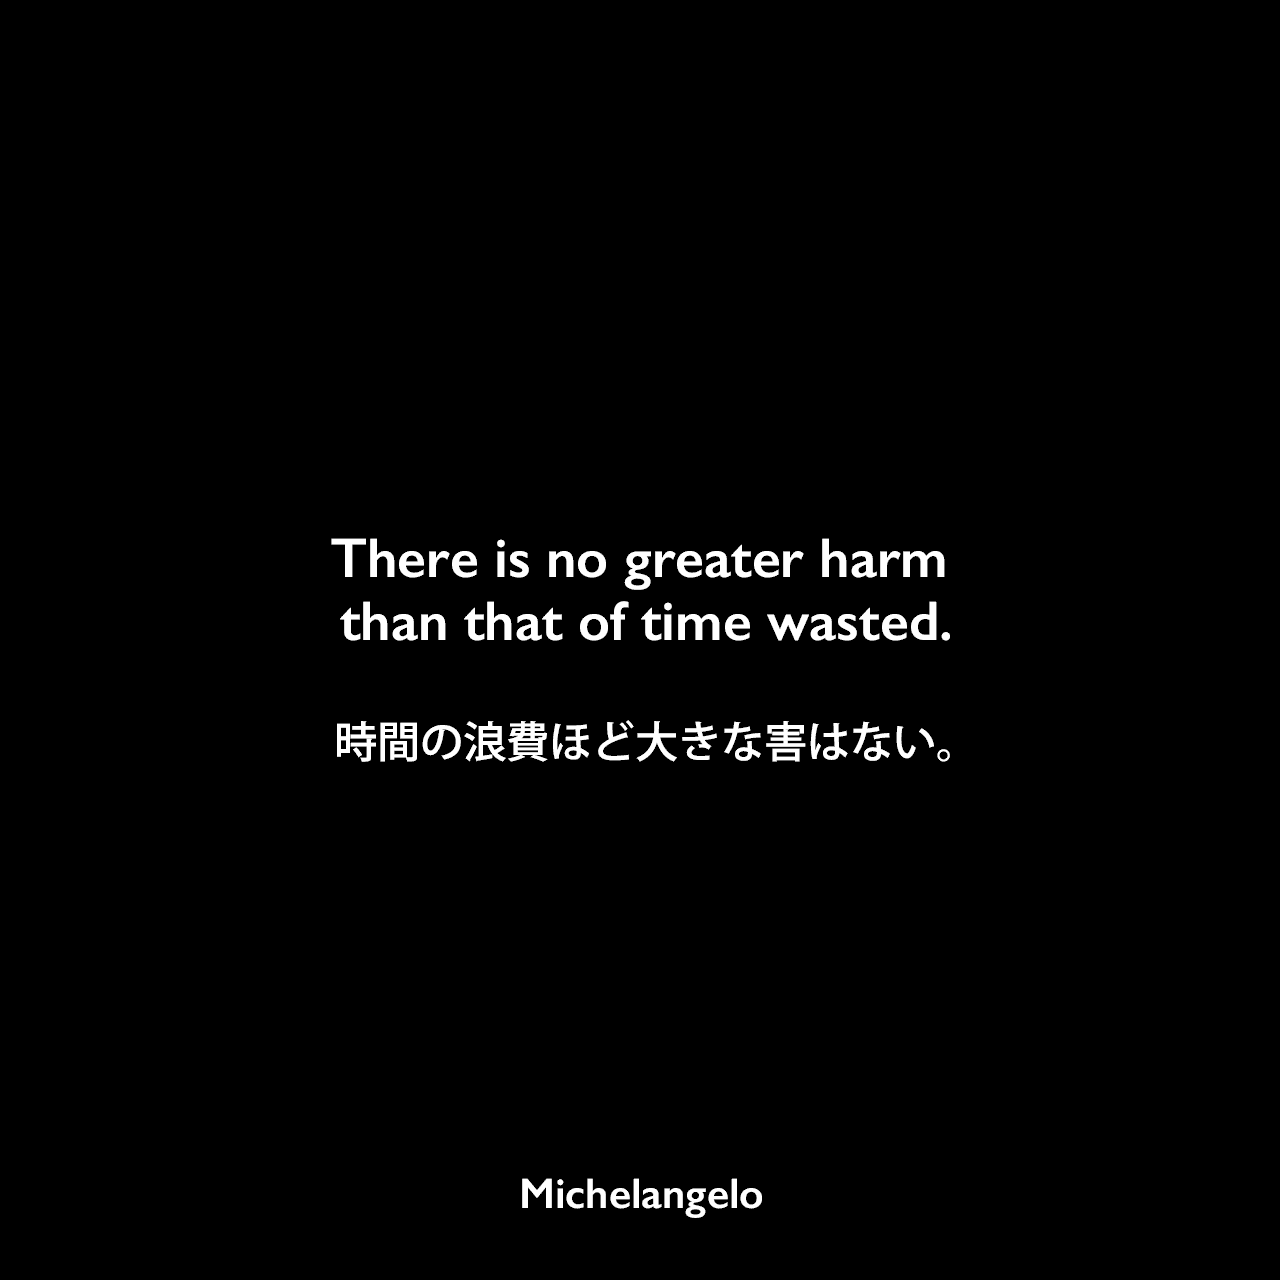 There is no greater harm than that of time wasted.時間の浪費ほど大きな害はない。Michelangelo